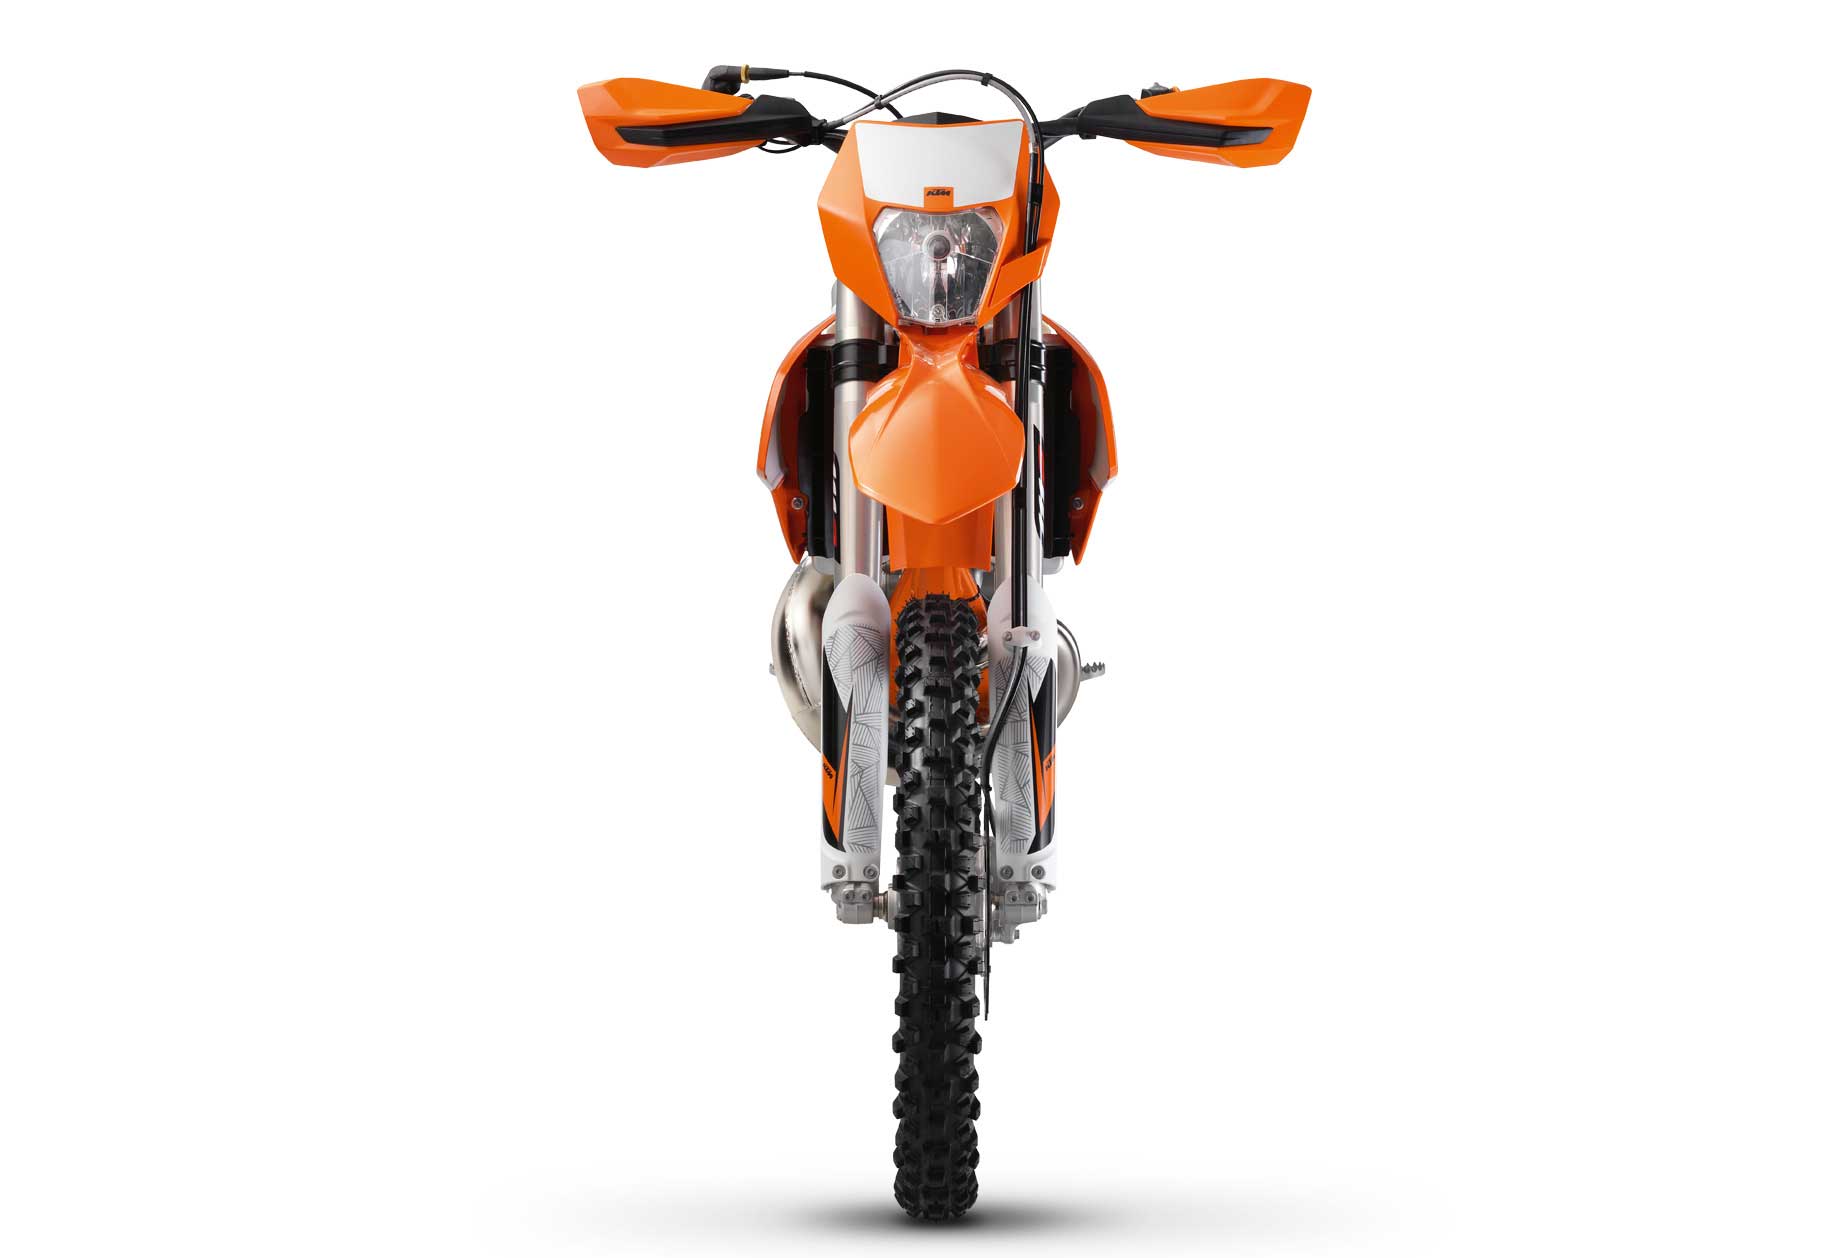 KTM 300 EXC front view